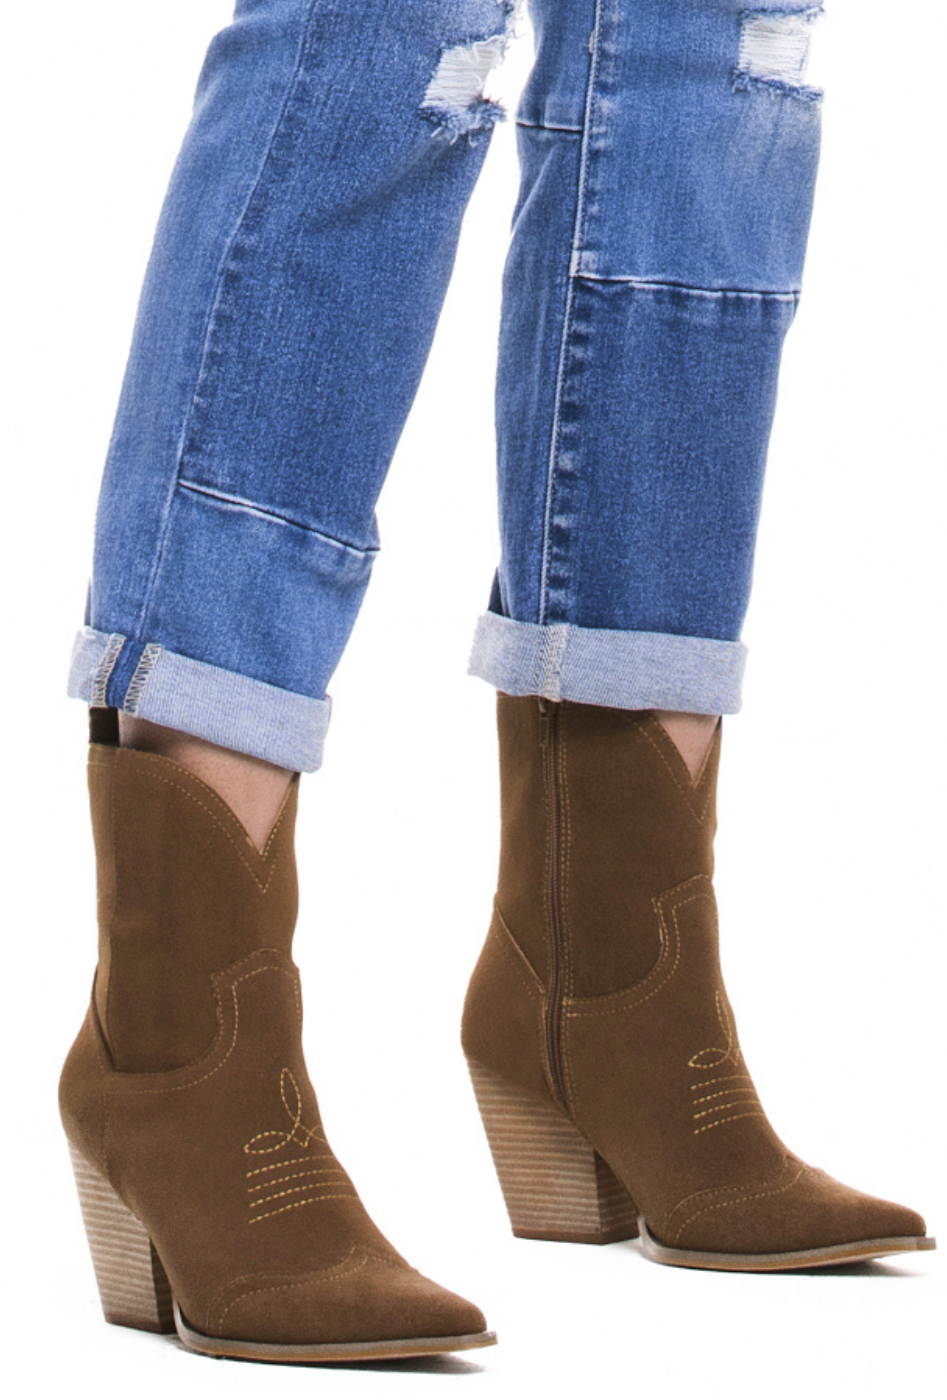 Ariella Brown Suede Western Boots - Expressive Collective CO.